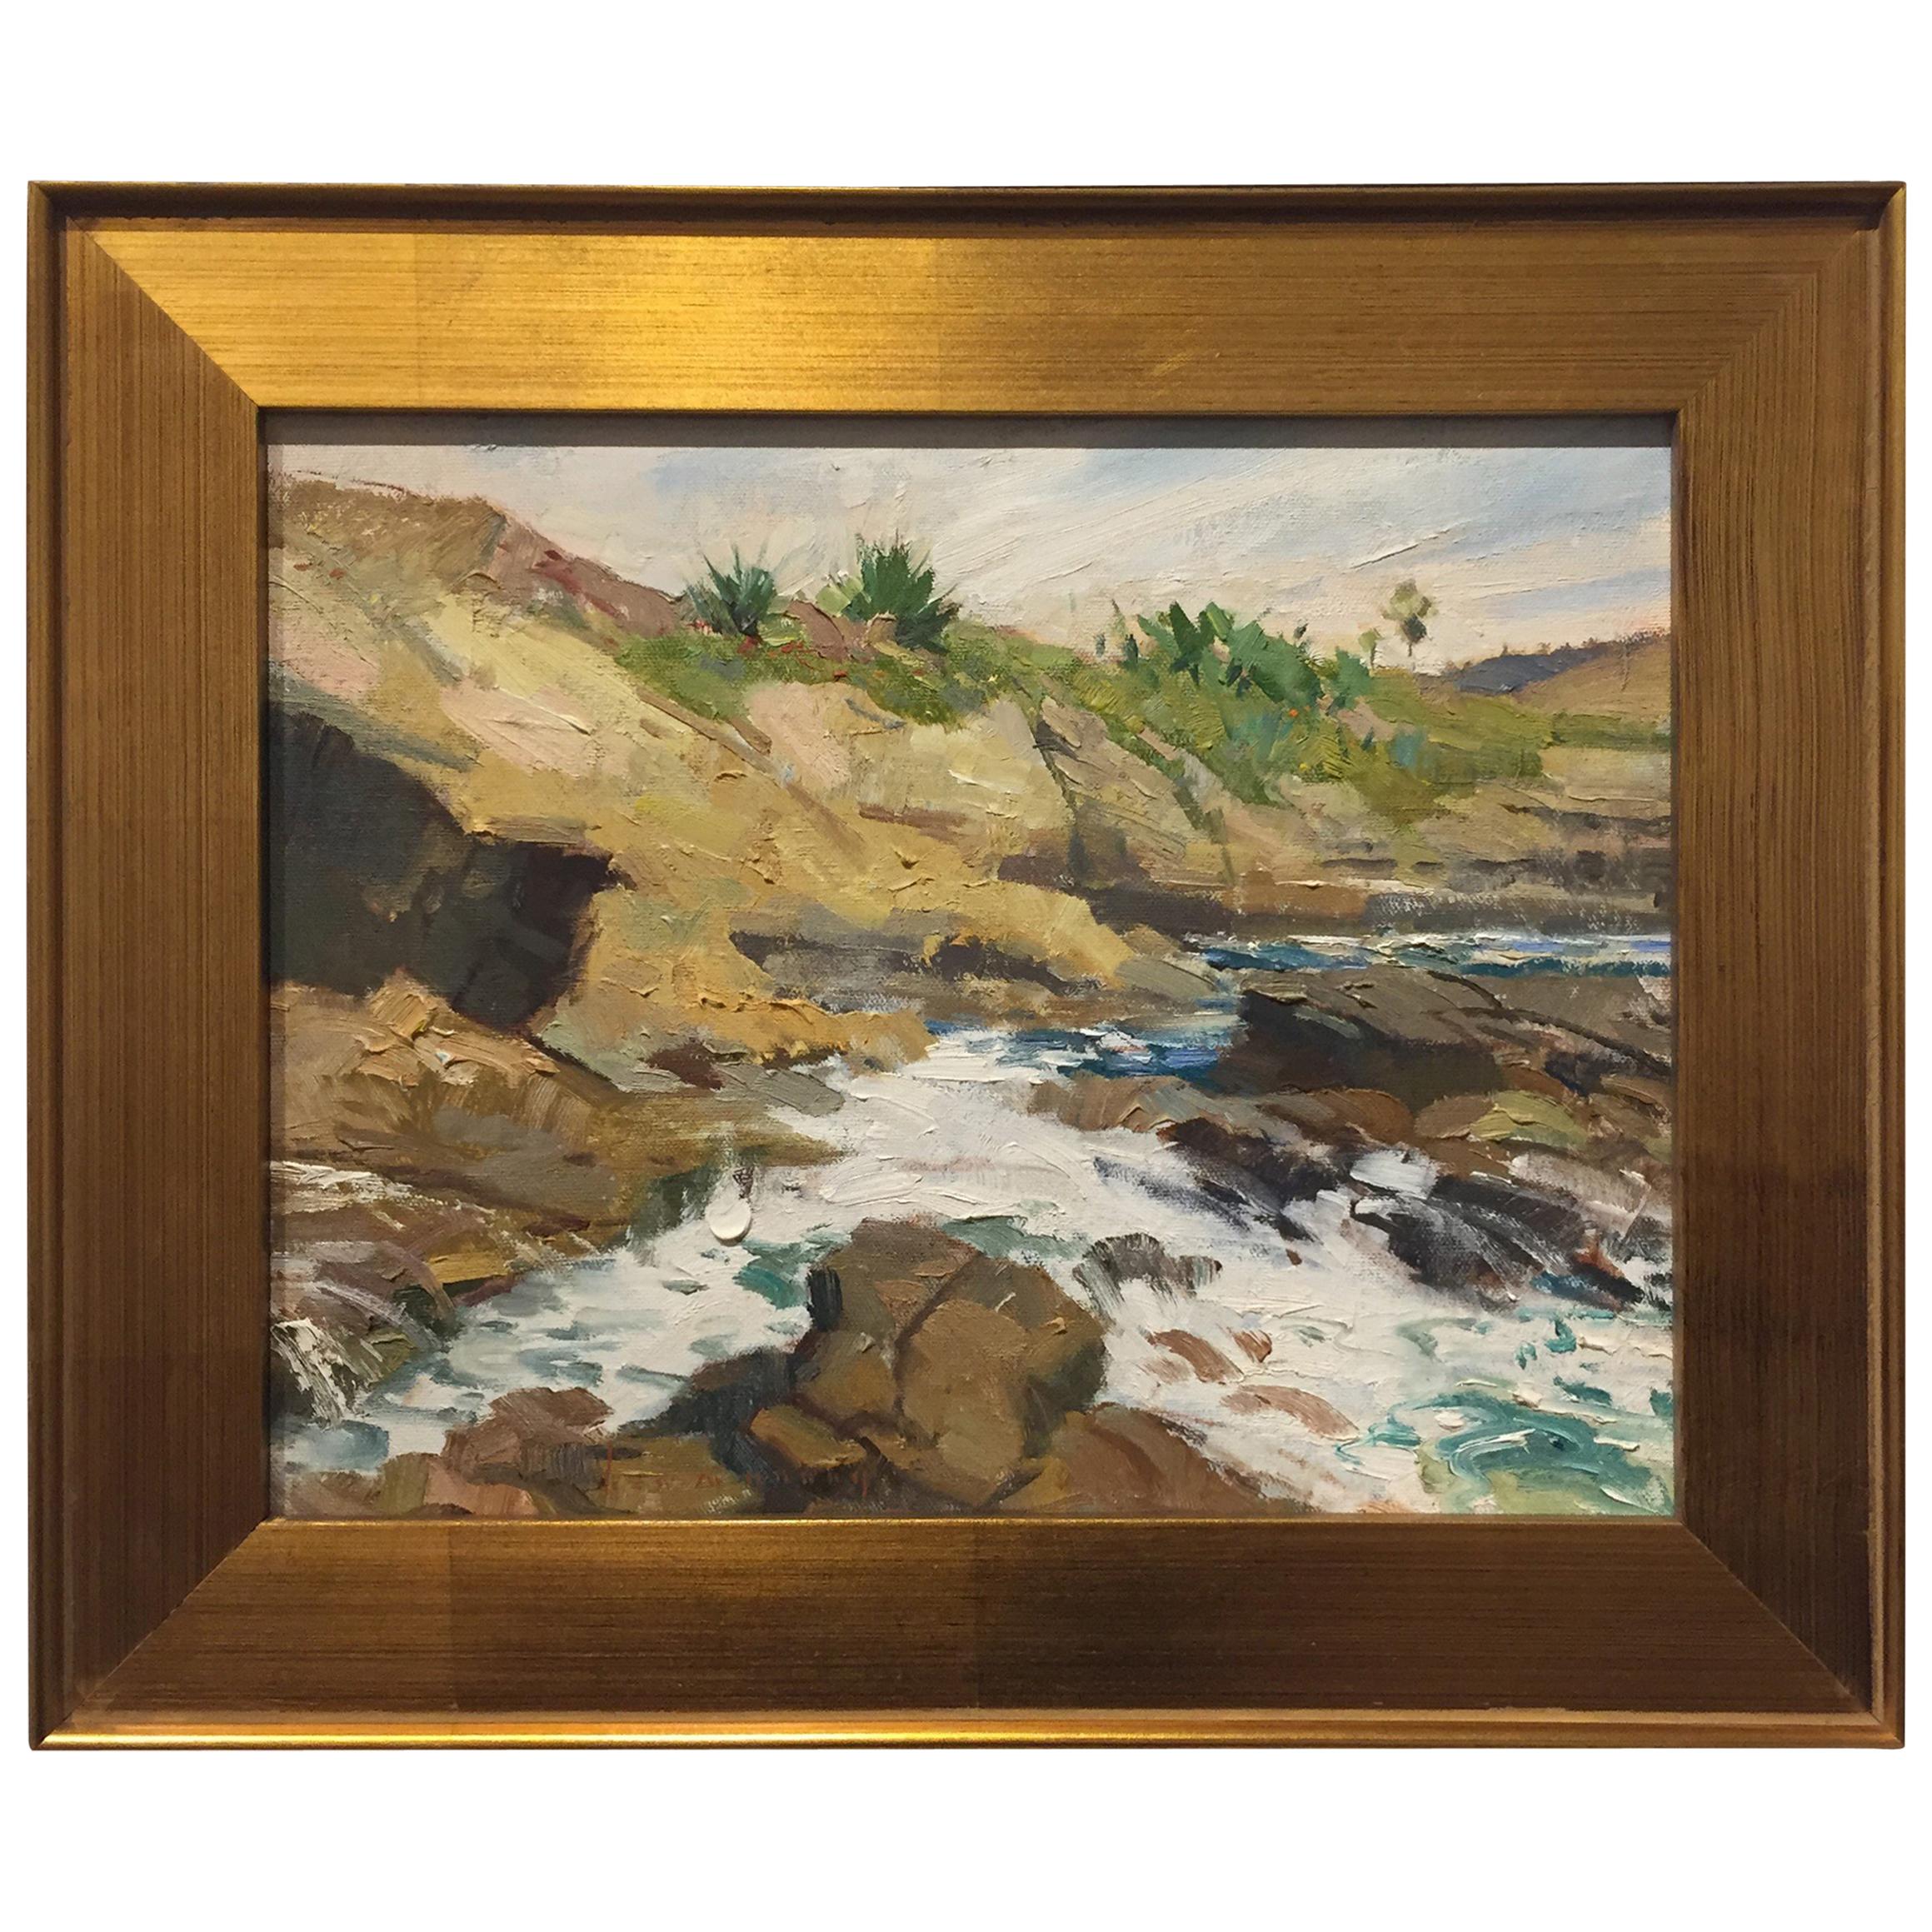 "Sun Gold Point, La Jolla" Plein Air Painting by Ben M. Young